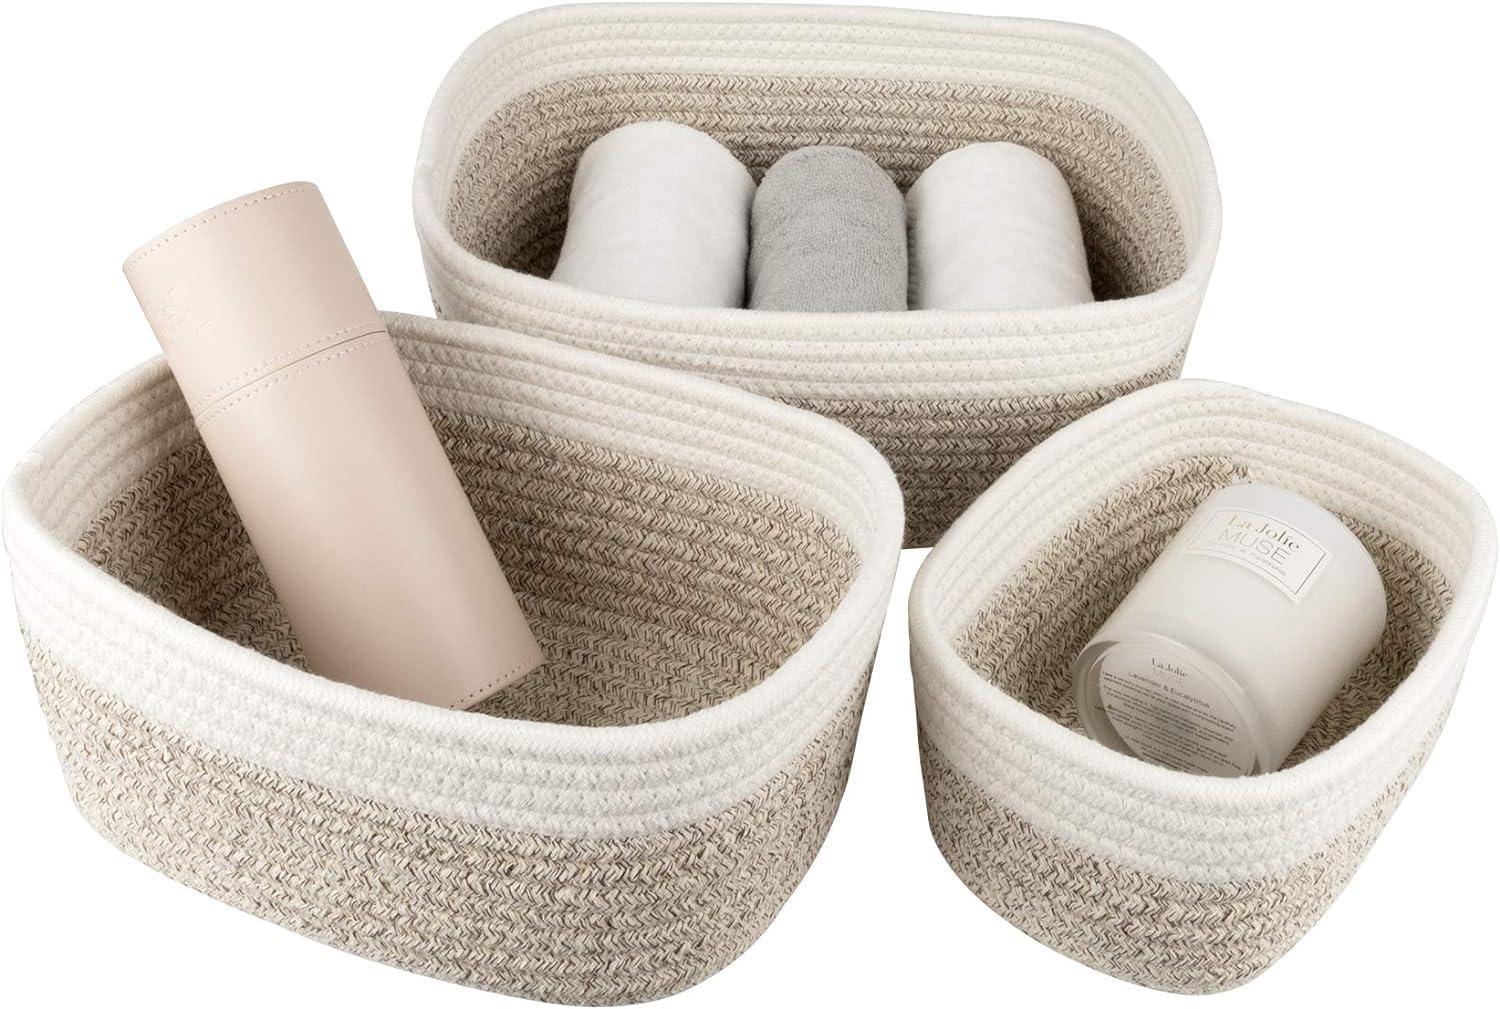 Shower caddies 13.5cm Woven Cotton Storage Basket, Set of 3 Multipurpose Stackable Baskets, White and Tan